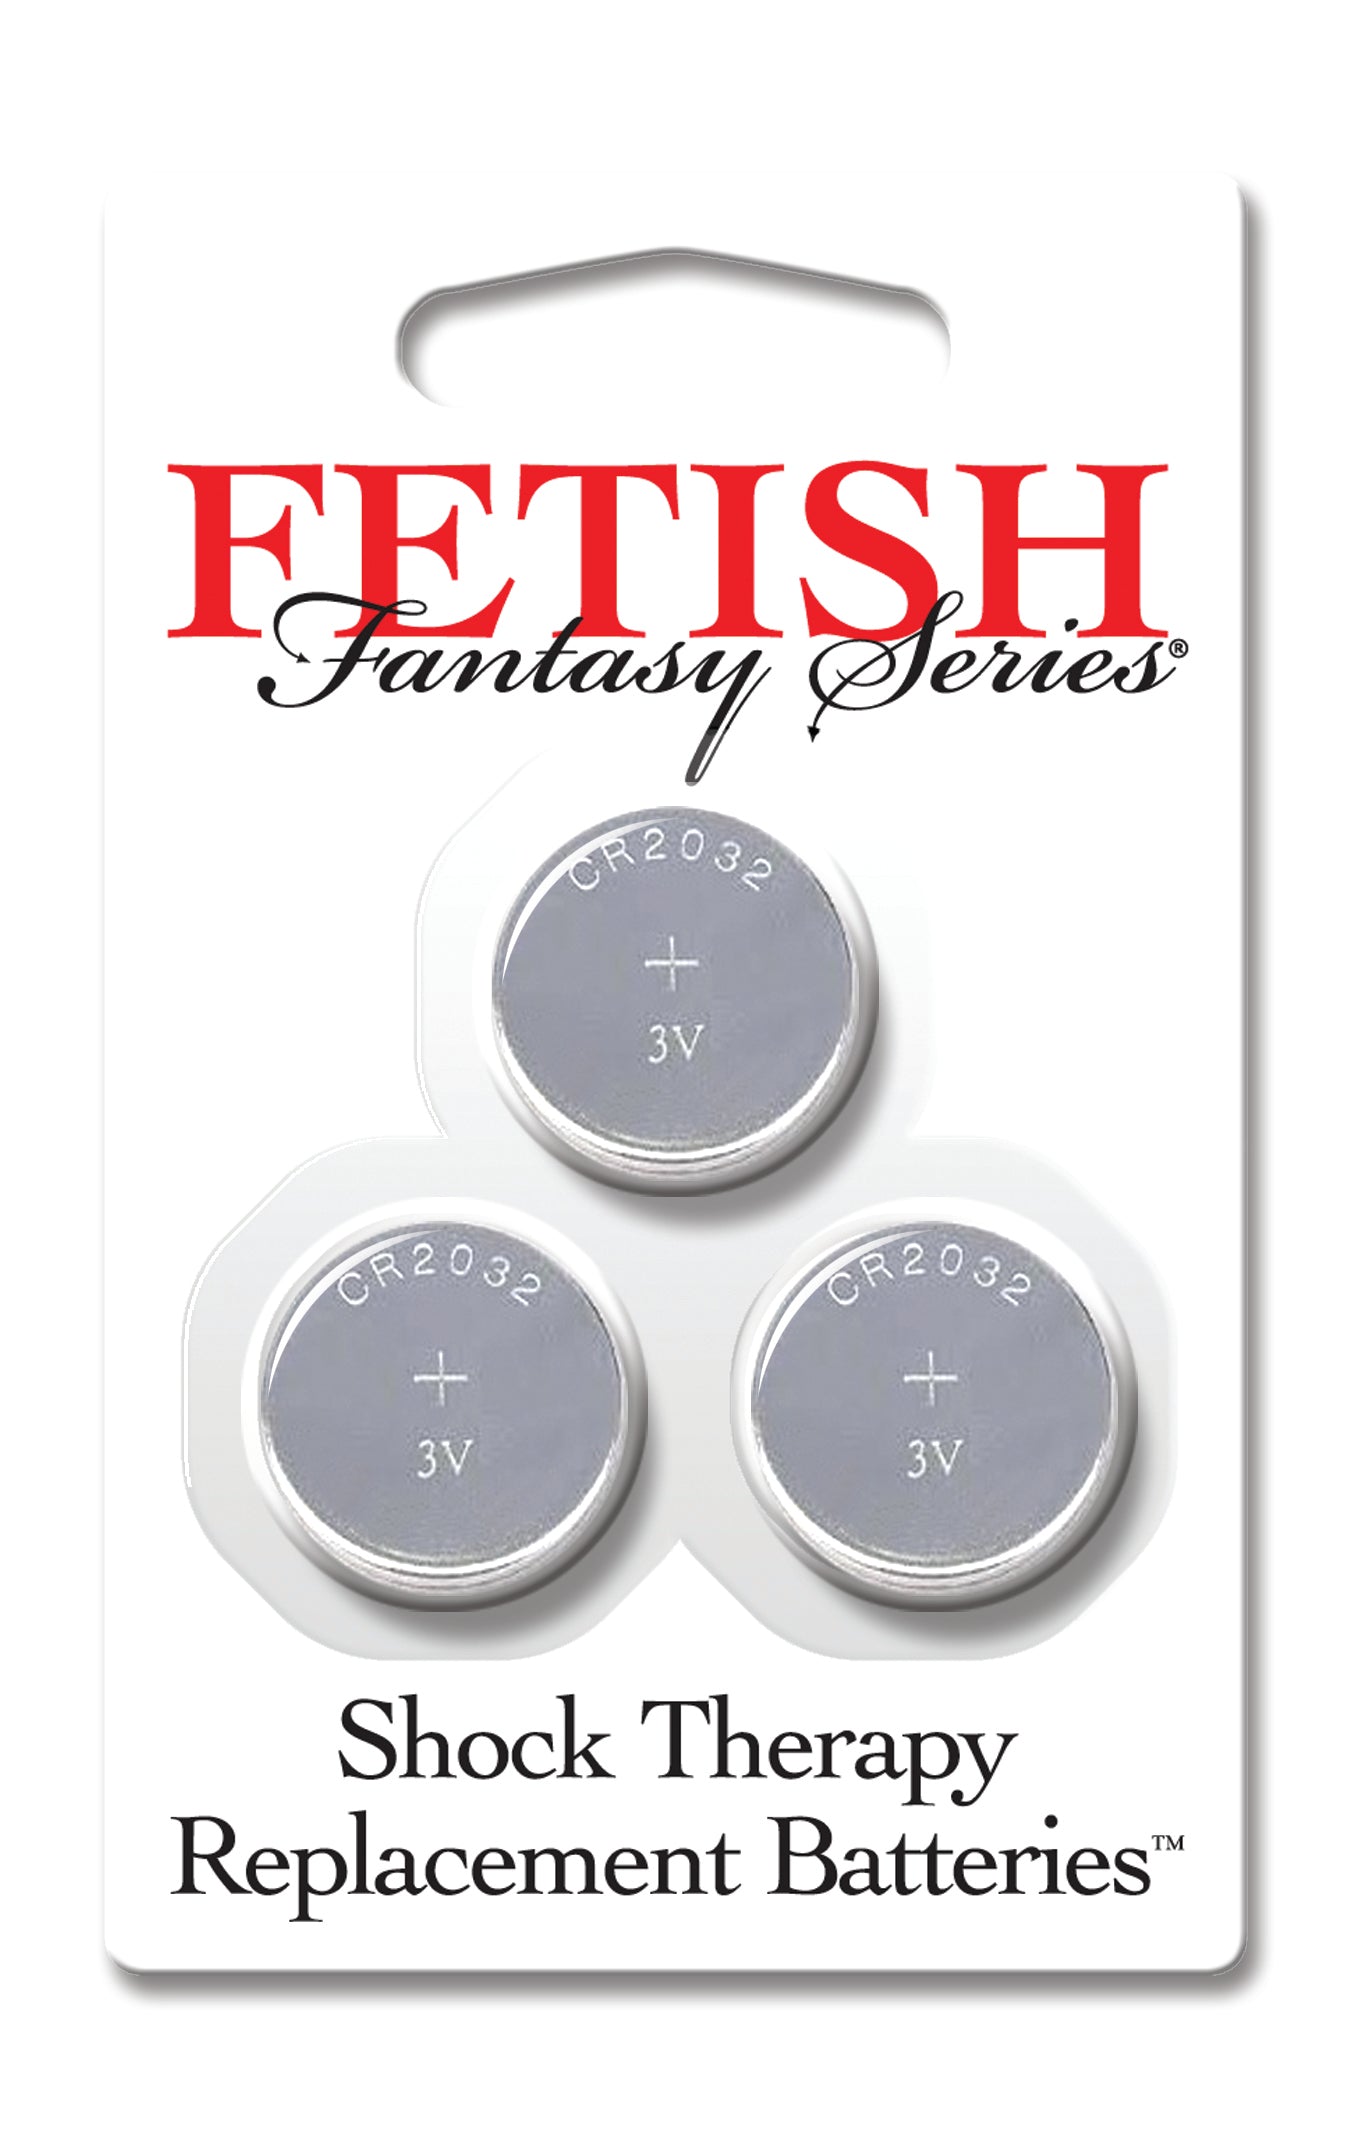 Fetish Fantasy Series Shock Therapy Replacement Batteries